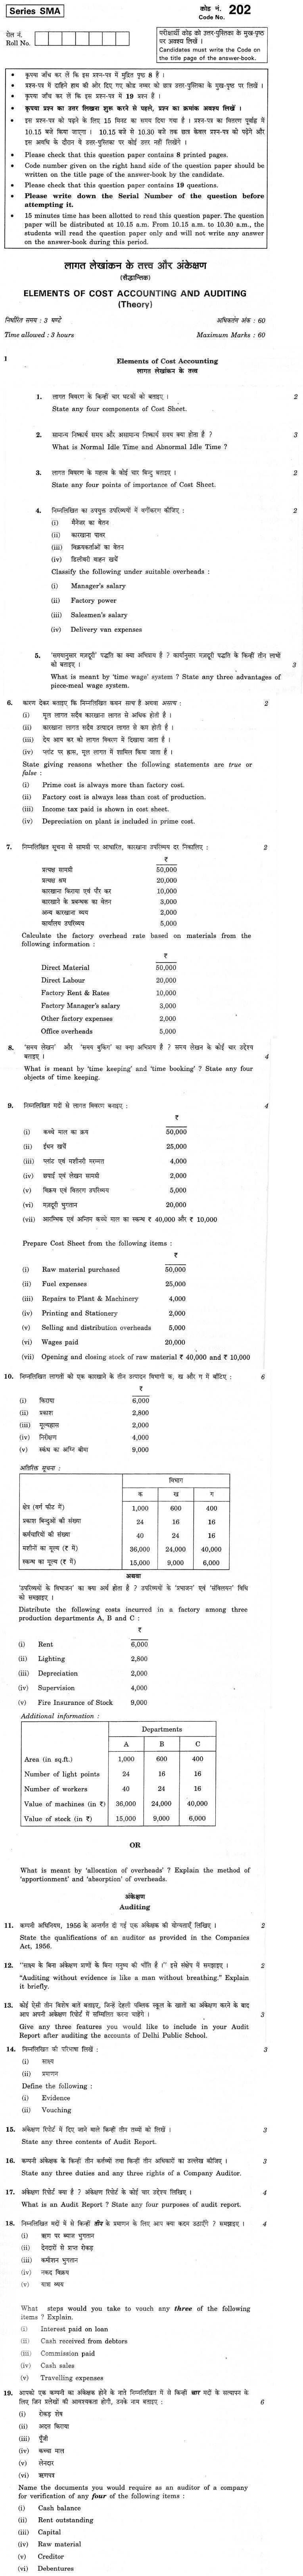 CBSE Class XII Previous Year Question Paper 2012 Elements of Cost Accounting and Auditing